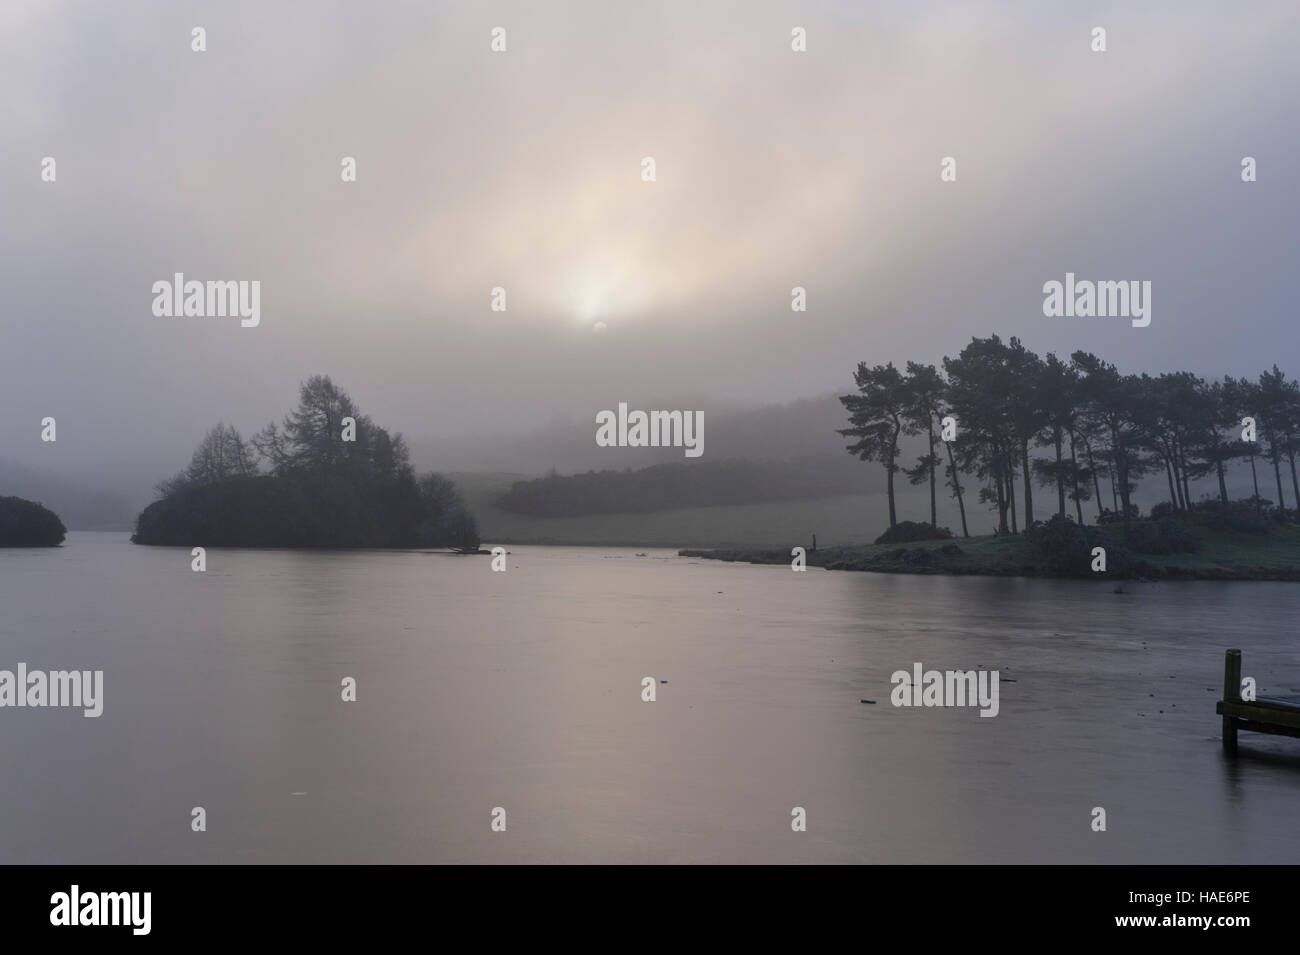 Misty scenes at the Knapps loch Kilmacolm with frost and ice covering everything Stock Photo